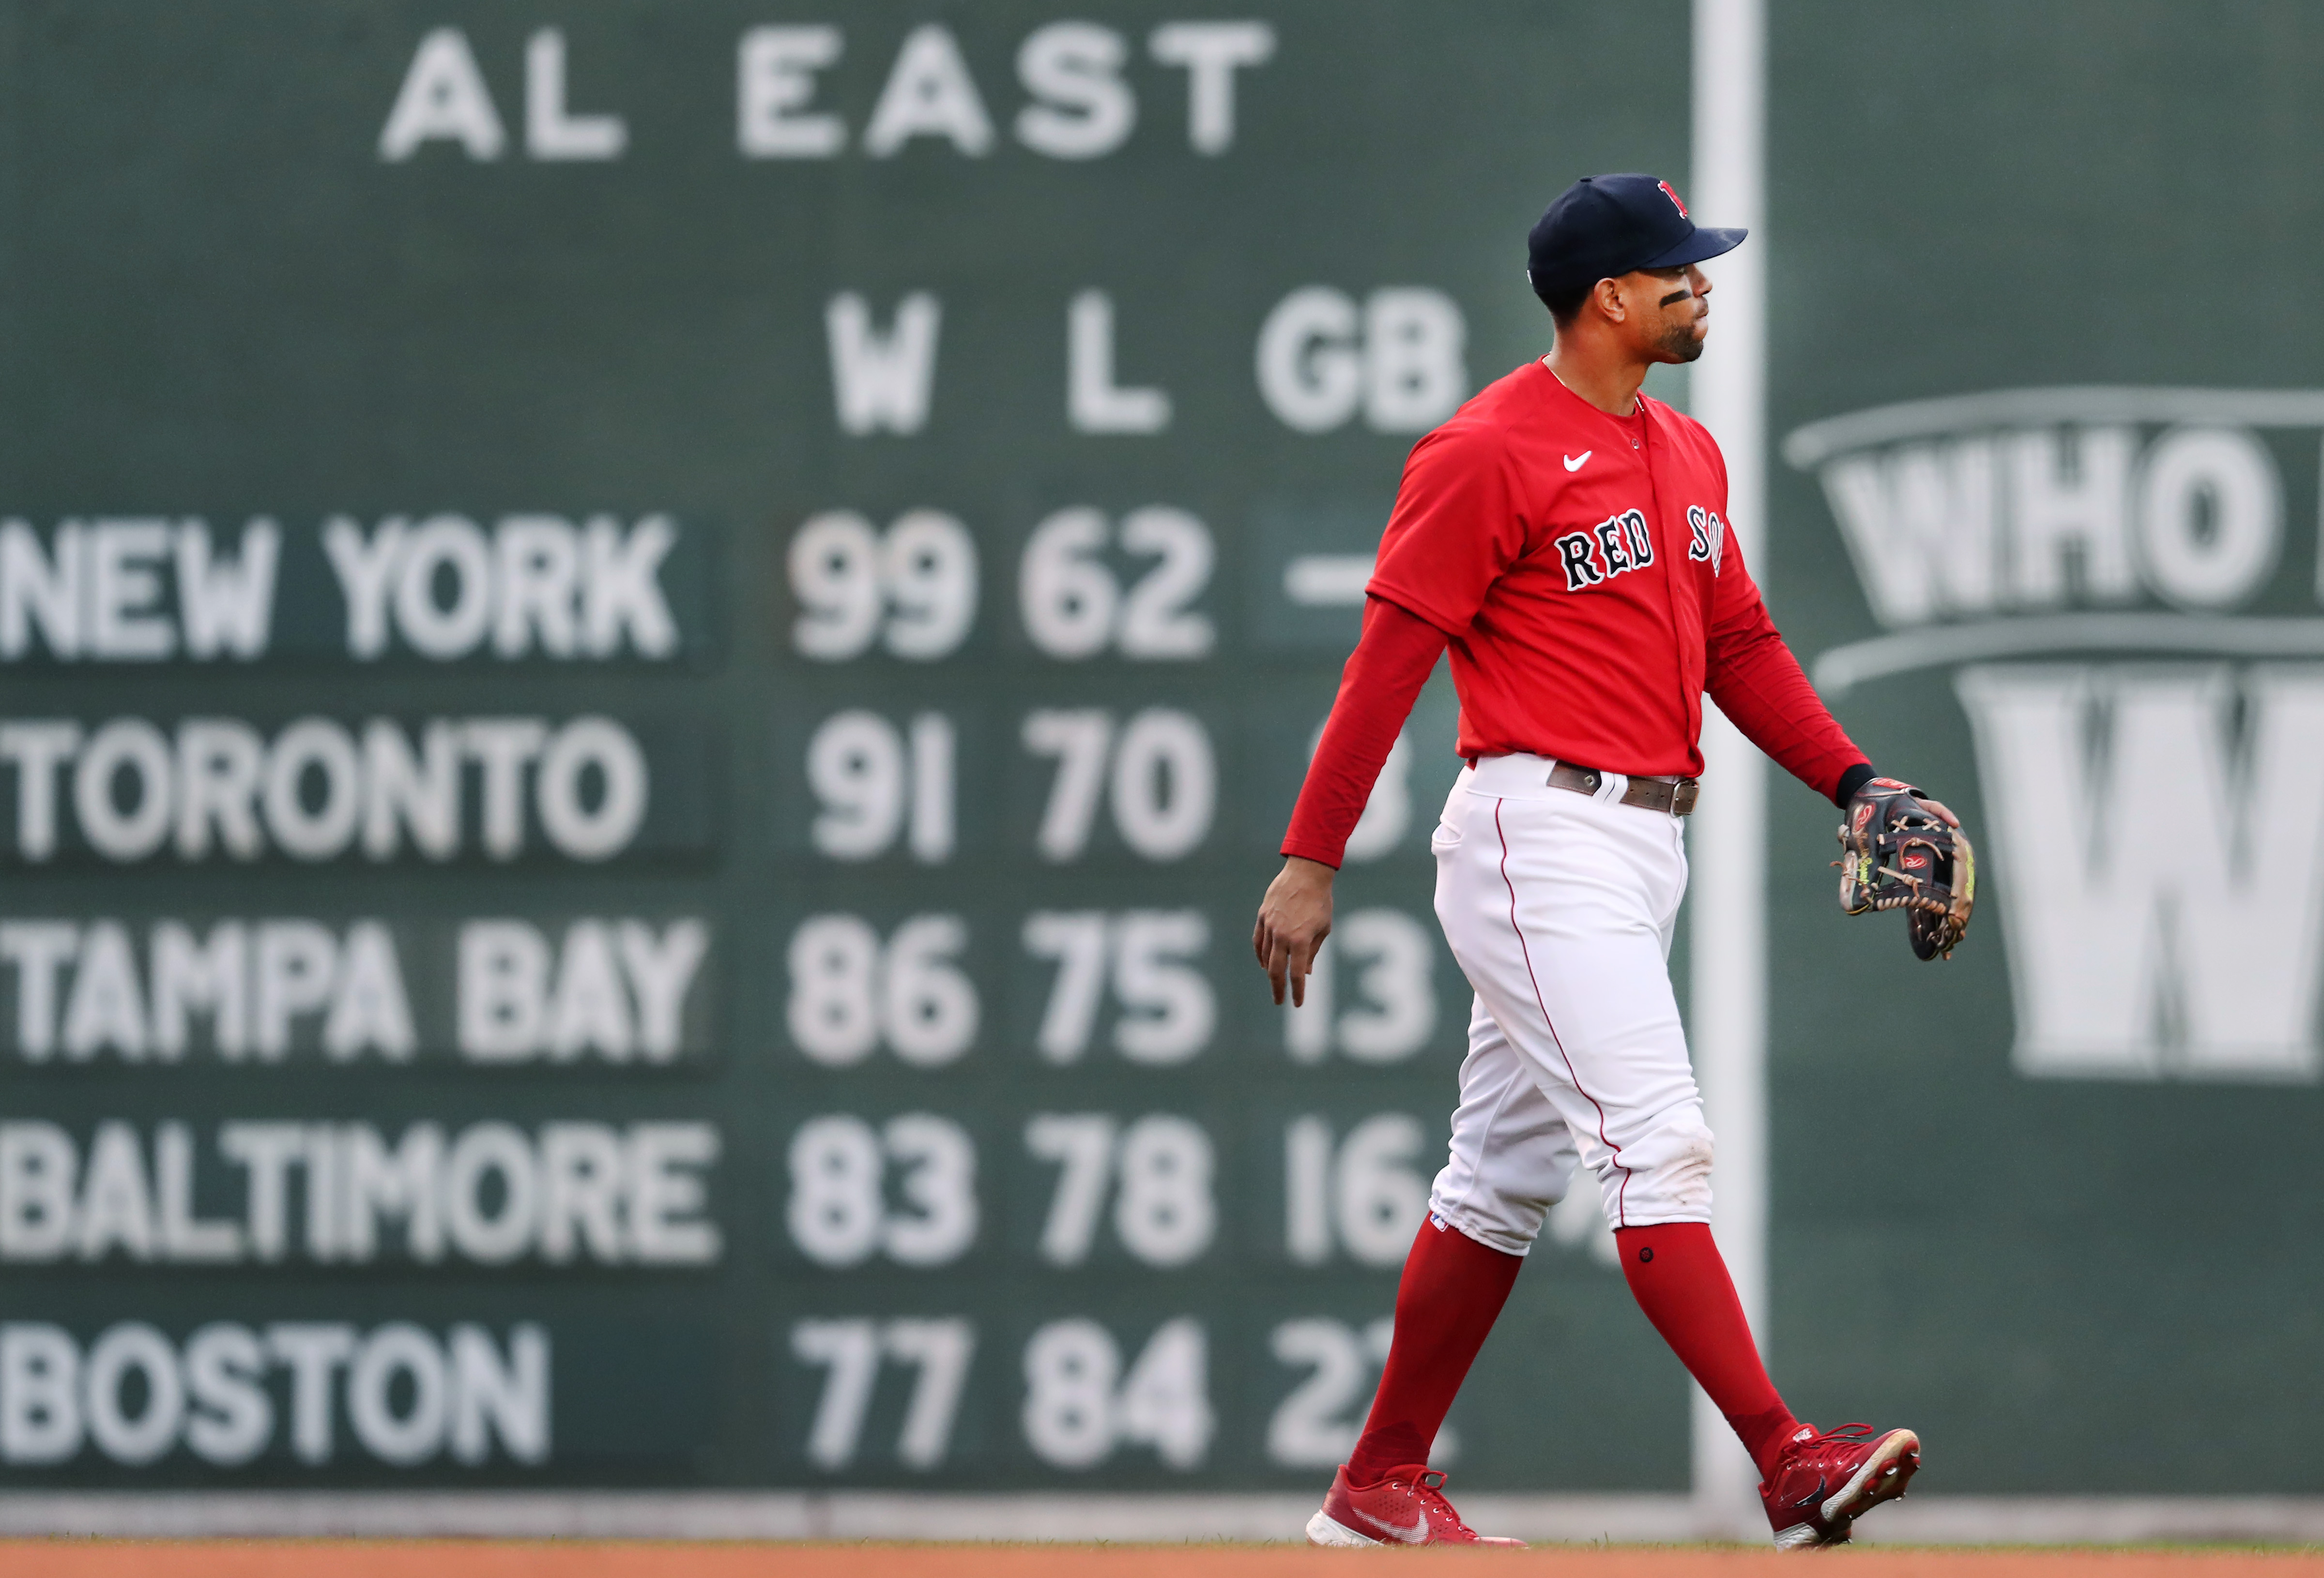 Red Sox reported offer to Xander Bogaerts trailed other MLB suitors